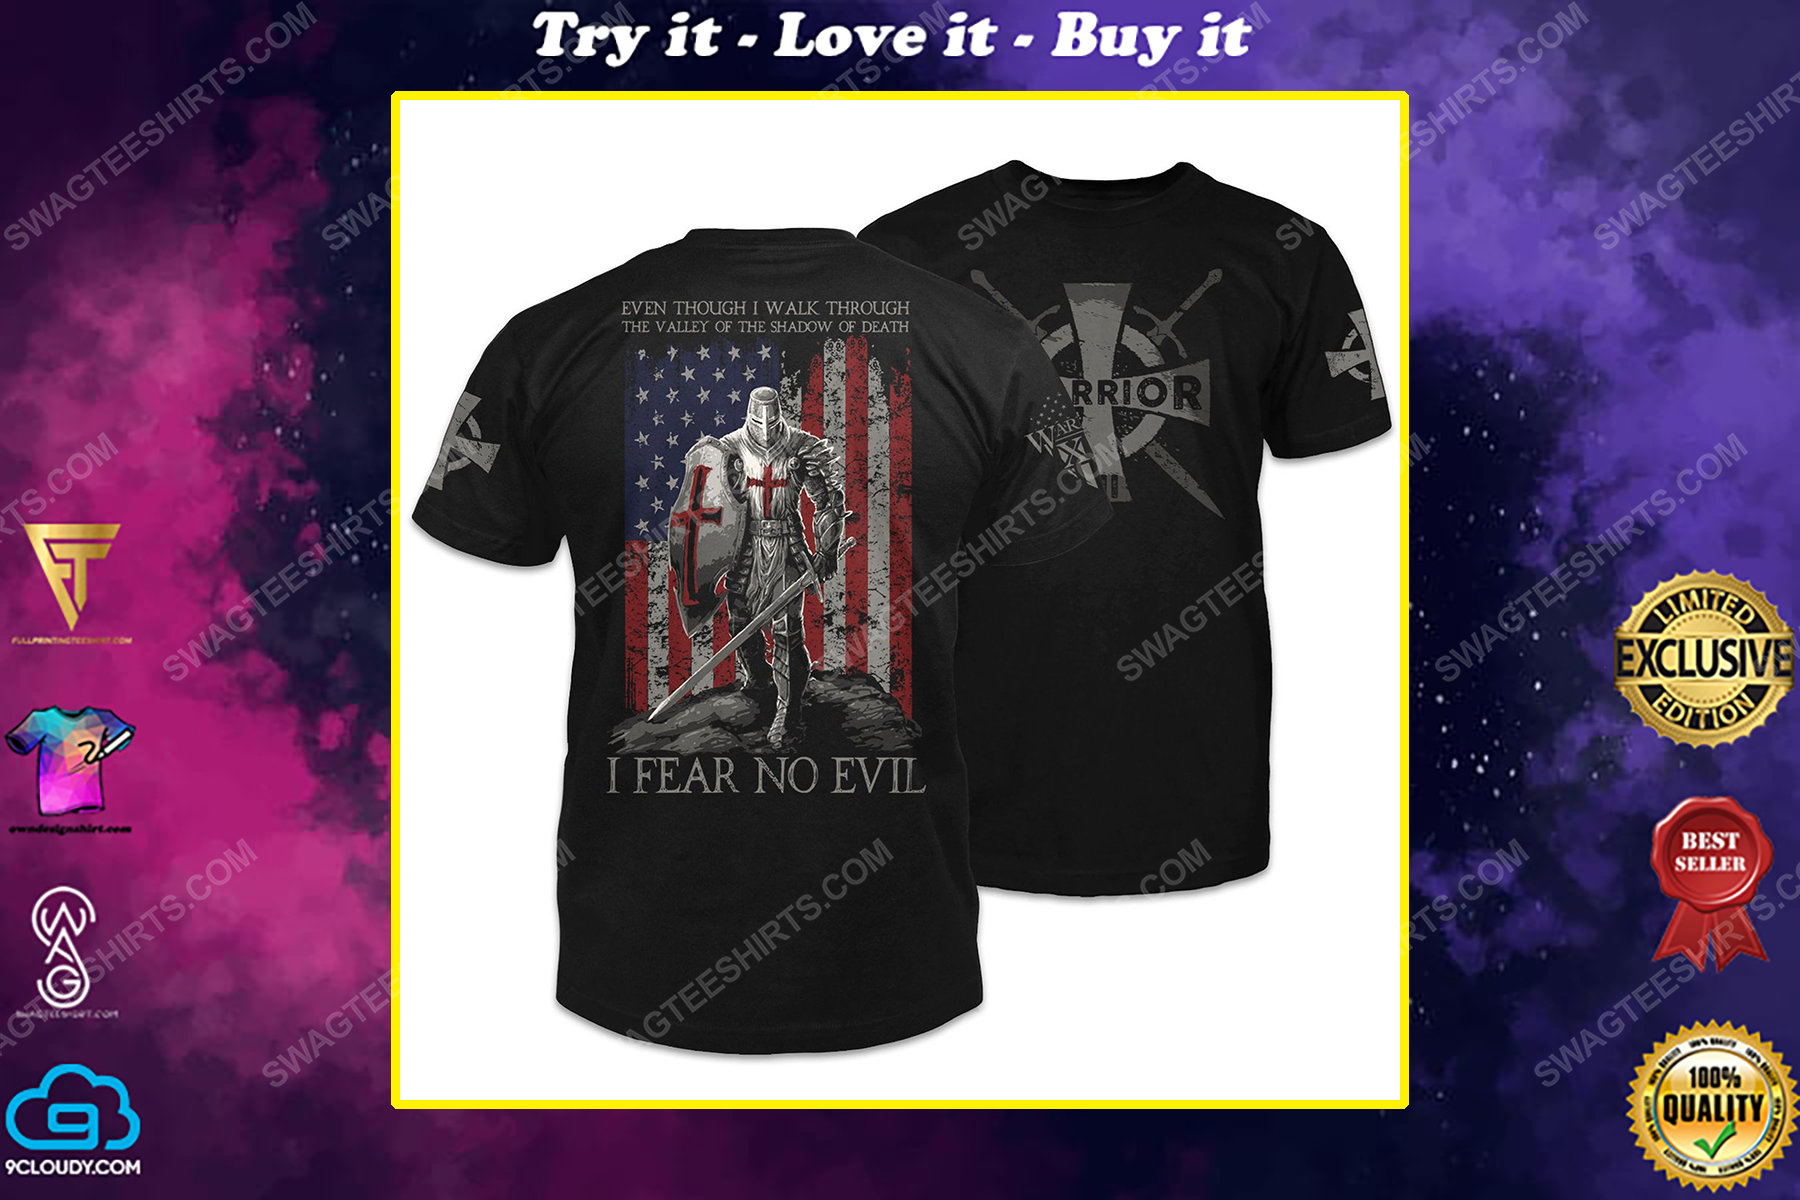 Even though i walk through the valley of the shadow of death knight templar shirt